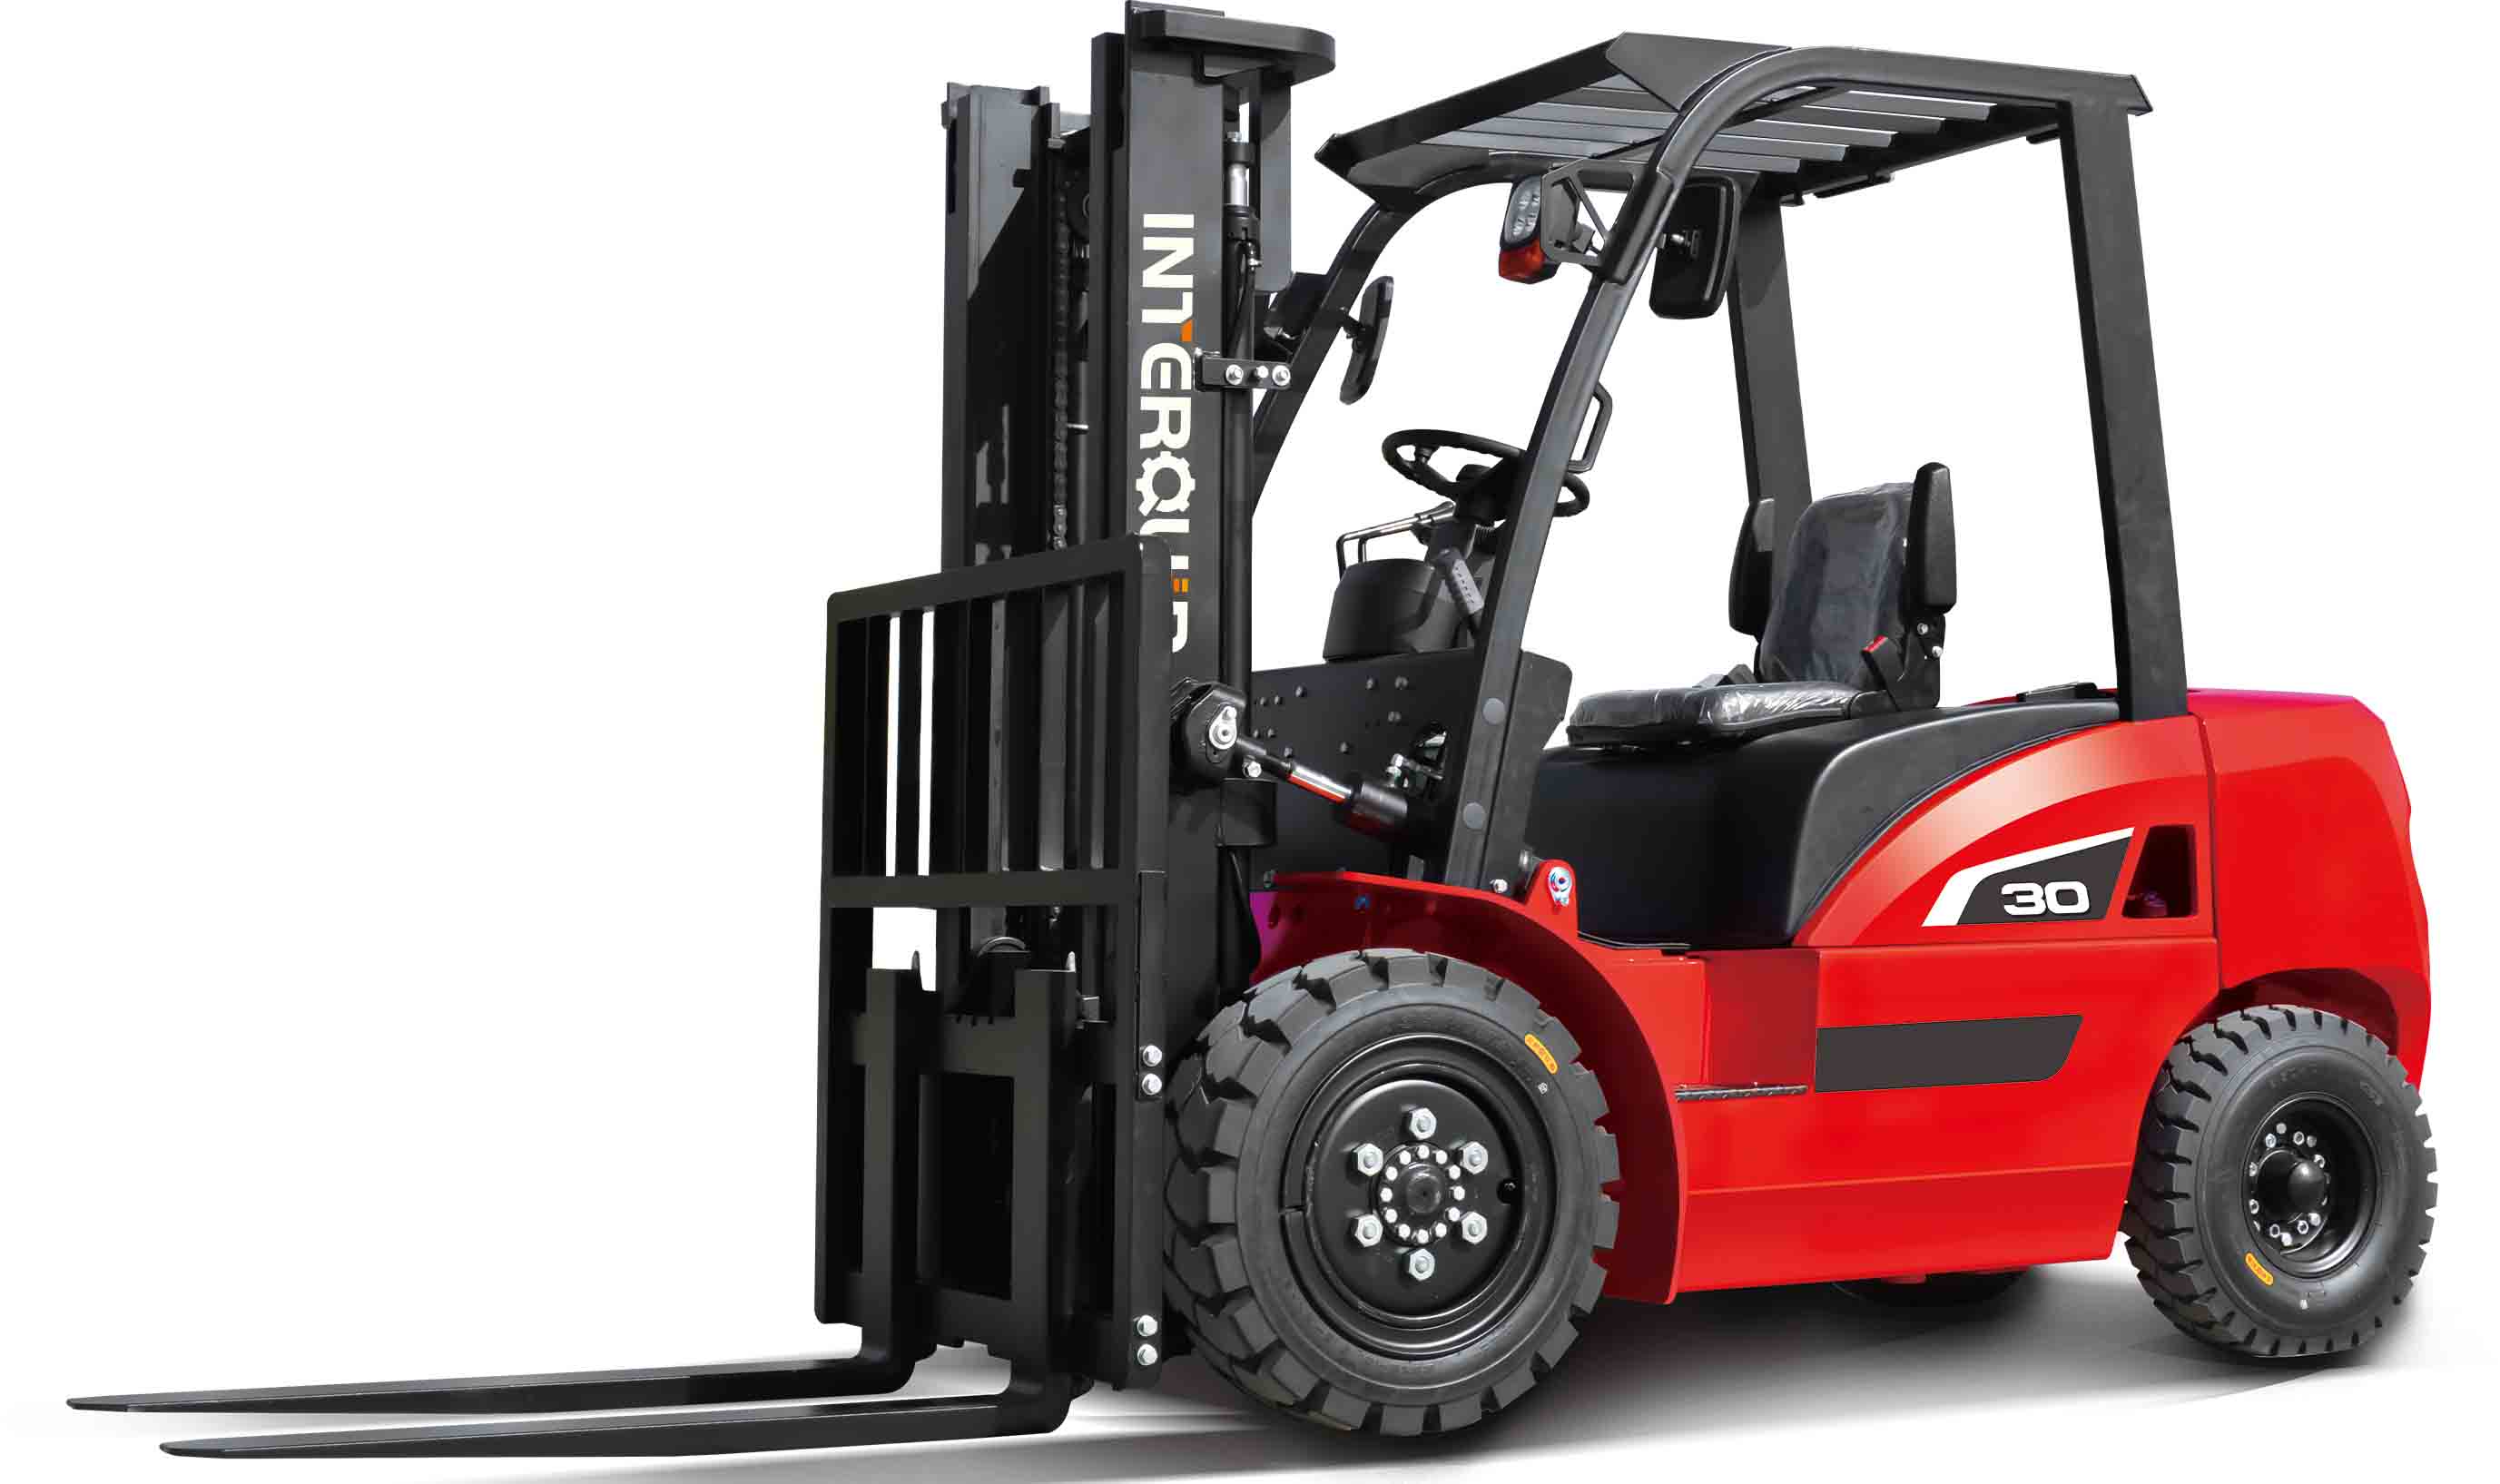 How to Install the Forklift Control Panel?